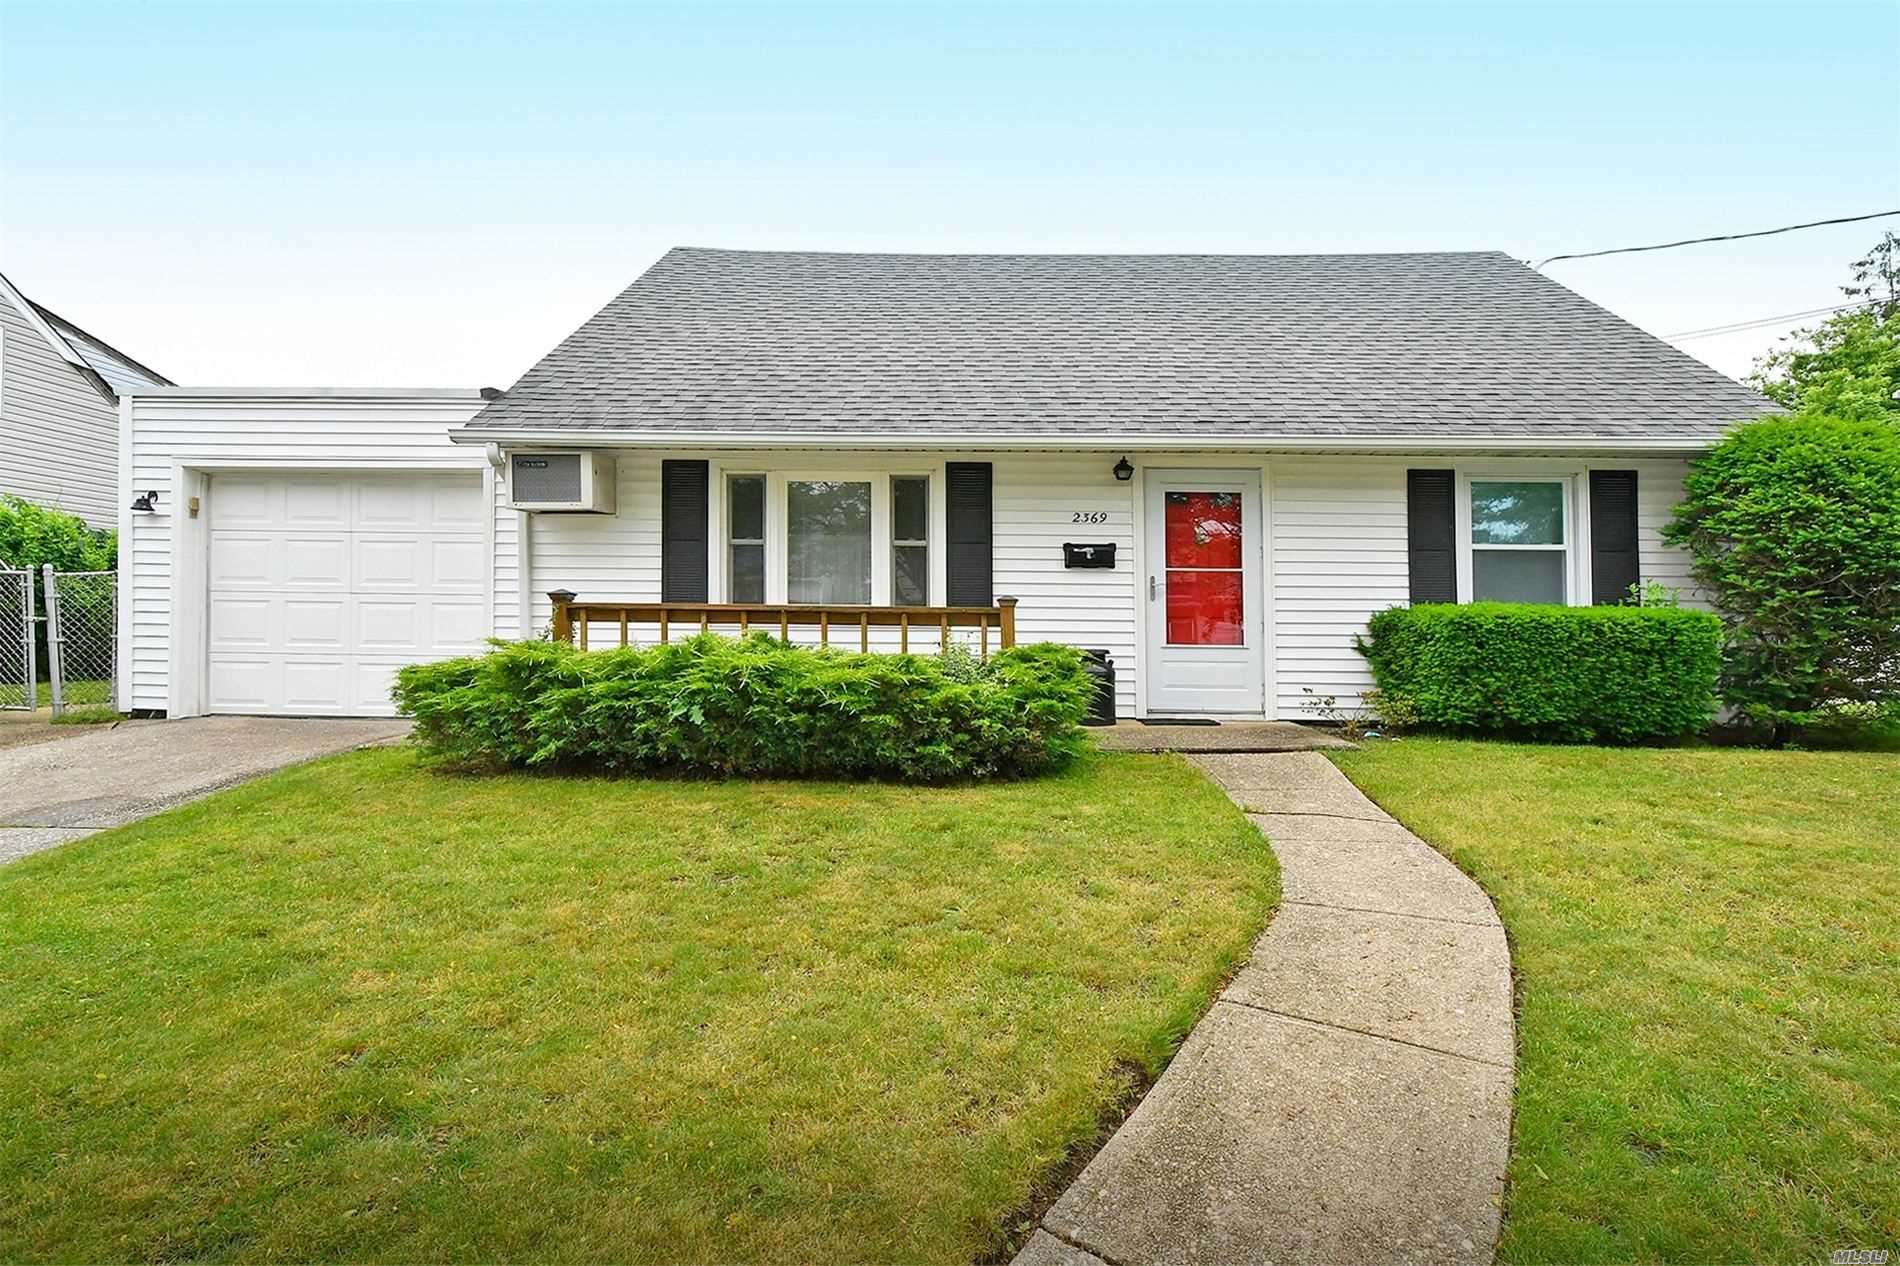 Expanded, Dormered Cape on quiet tree-lined street. Move-in condition. Four Bedrooms And Two Full Baths. Large Fenced Back Yard. 7 Year Old Heat. 5 Year Old Windows. Recent Roof. Wantagh Blue Ribbon Schools. Close To Beautiful Parks, Marina, Bike Path to Jones Beach and Mass Transit. Priced to sell!!!!!